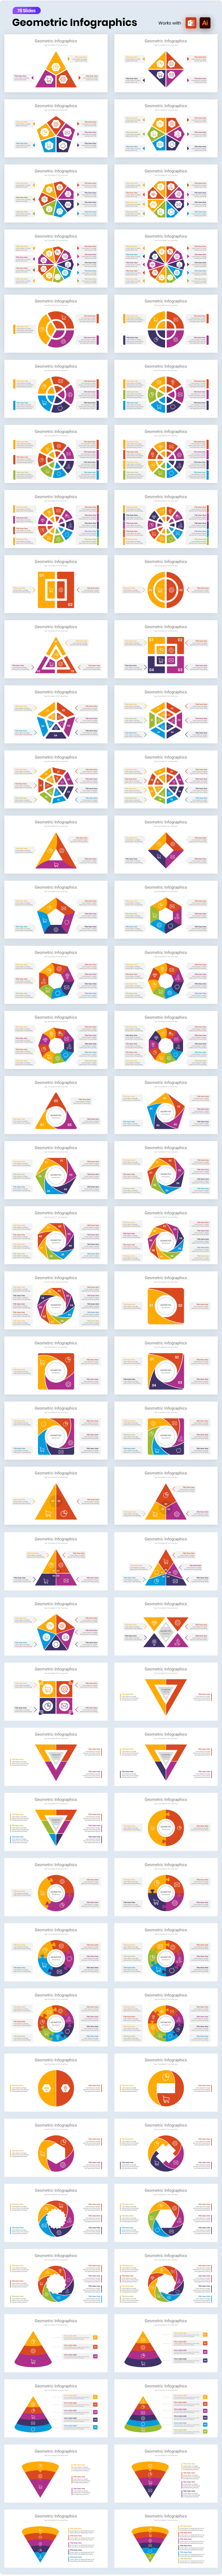 Infographic Pack - Multipurpose PowerPoint Bundle - 15